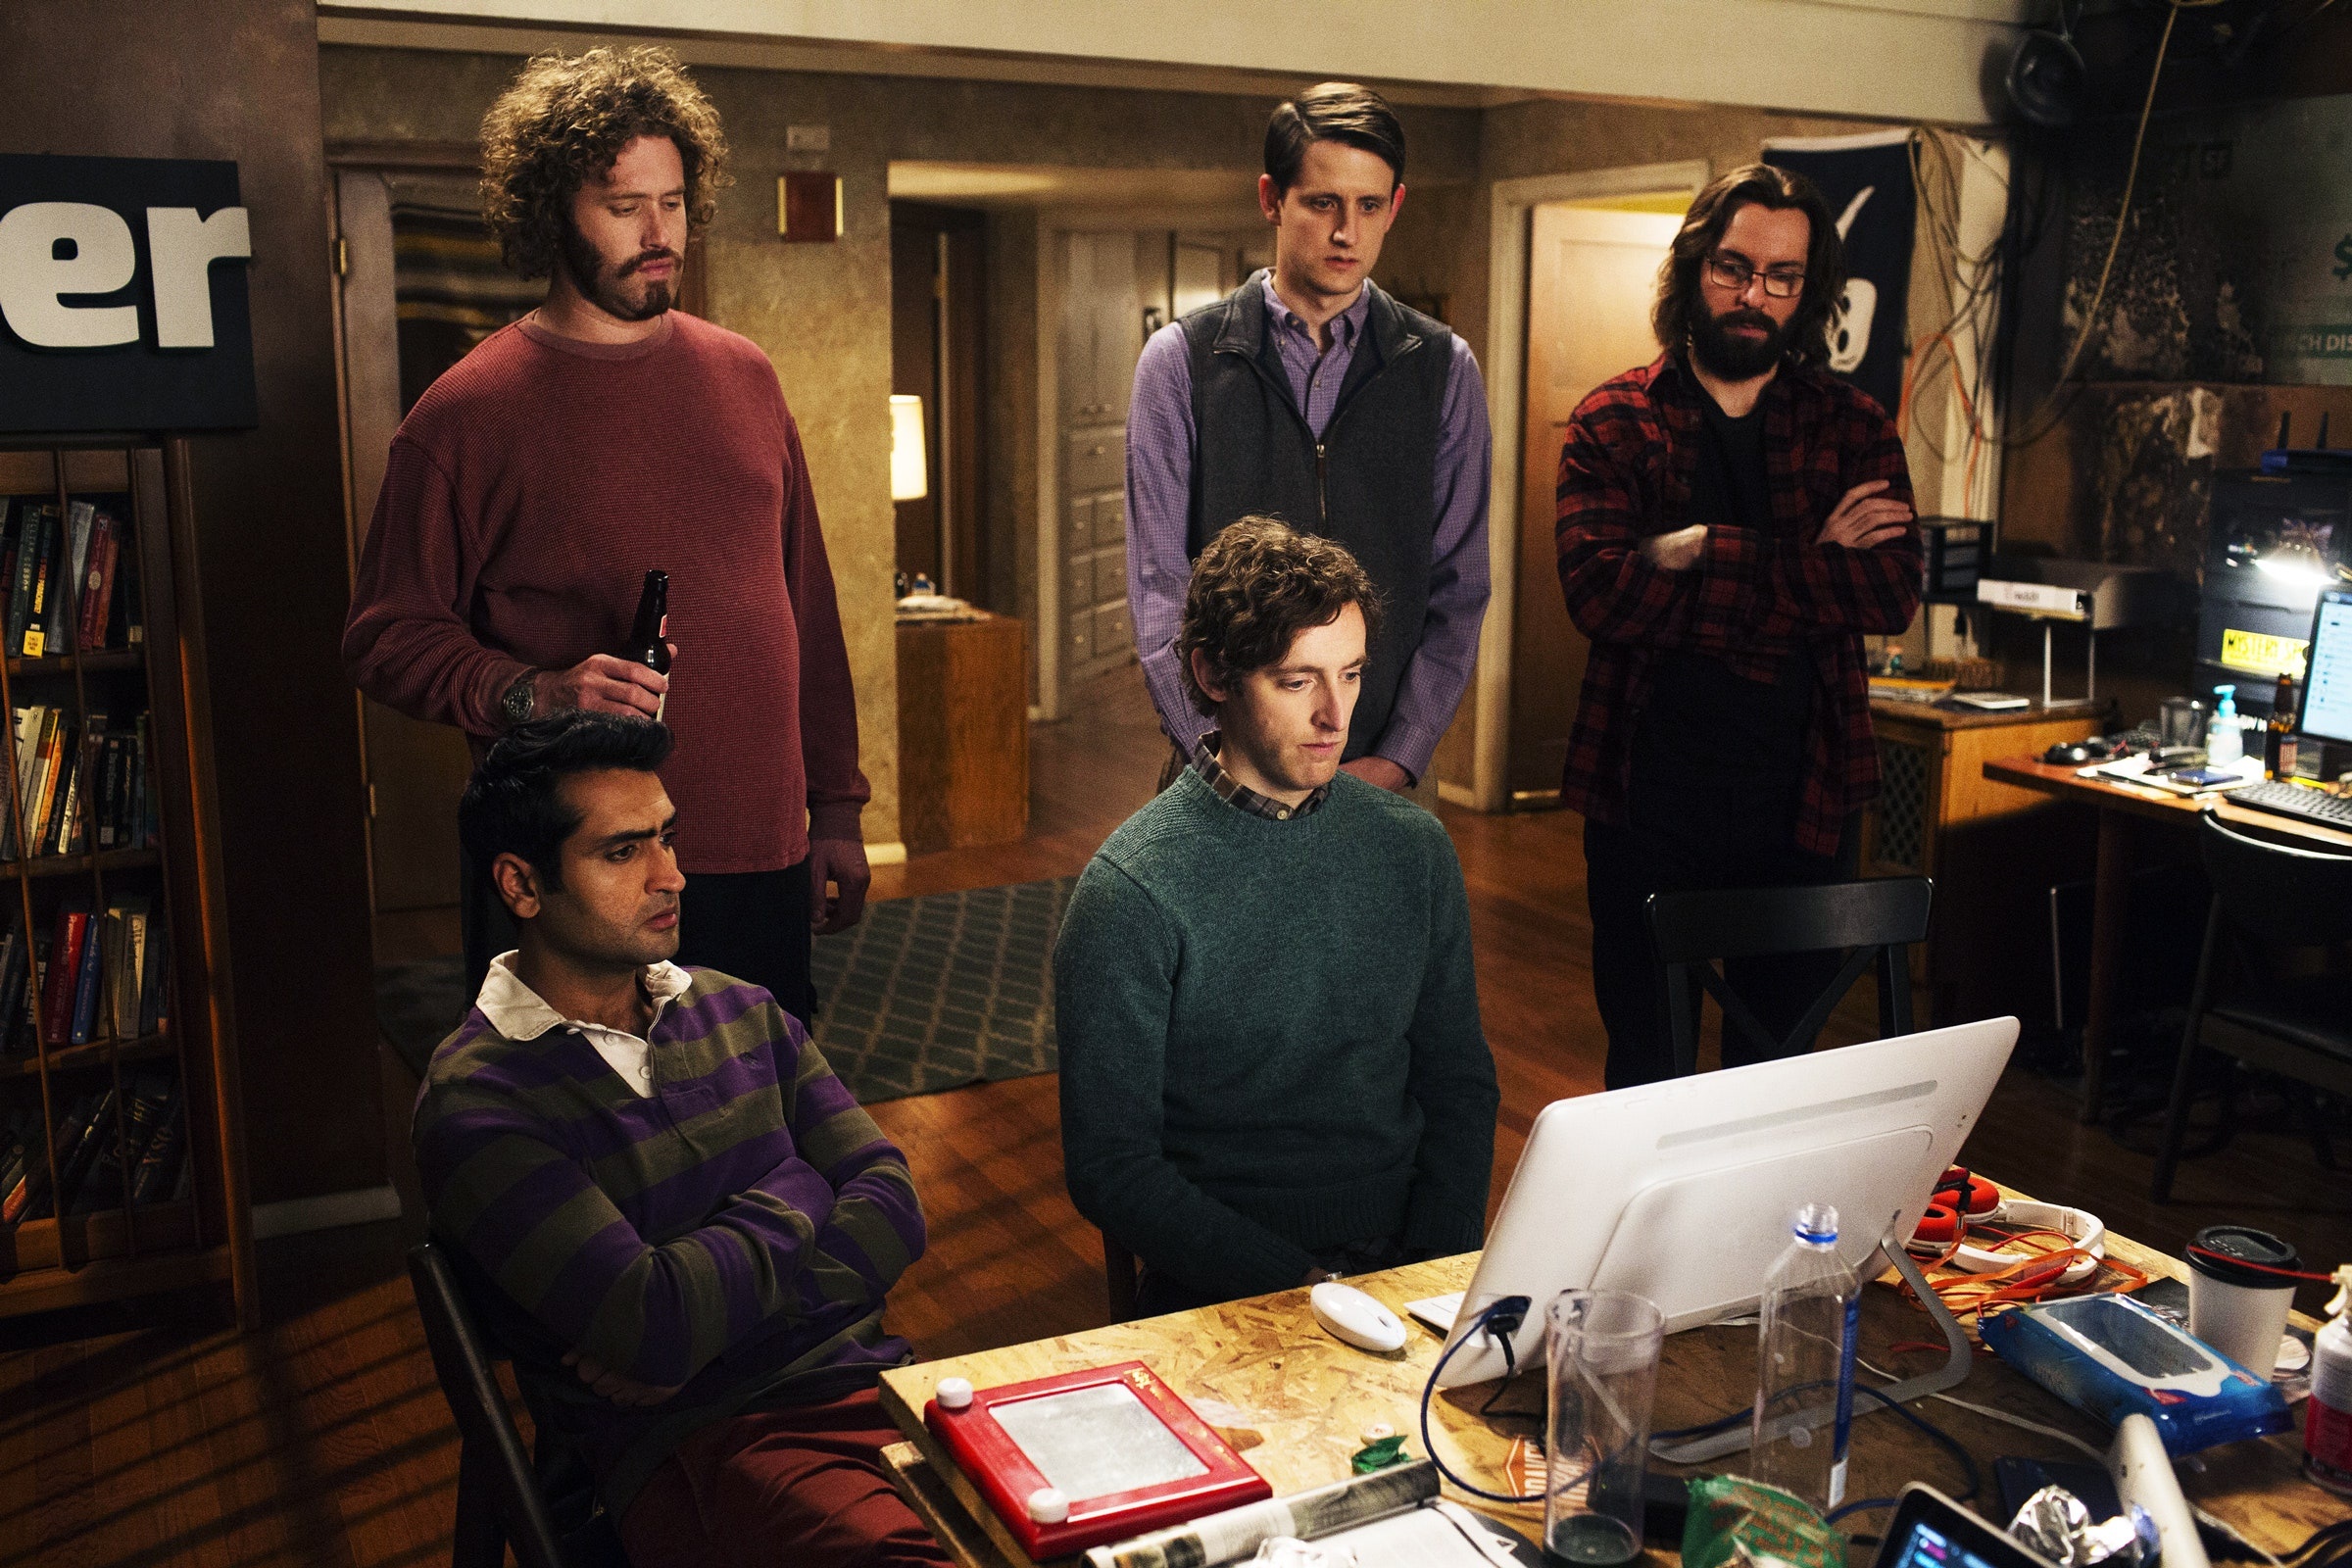 Silicon Valley binge-watching, Wired series guide, Tech industry satire, Hilarious comedy, 2400x1600 HD Desktop